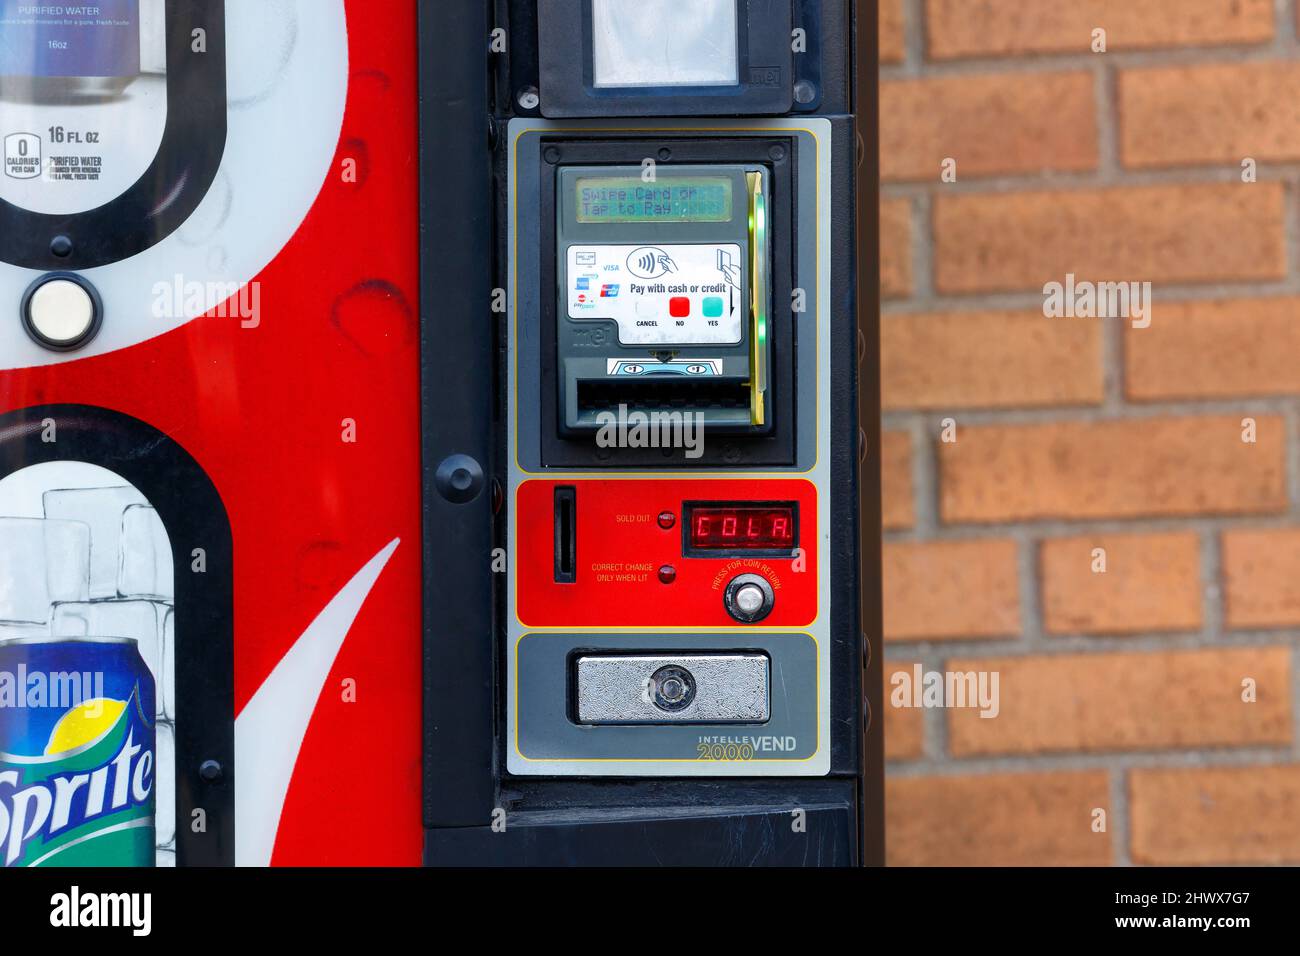 Traditional cash, and cashless, contactless, credit card payment options on a soda vending machine. Stock Photo